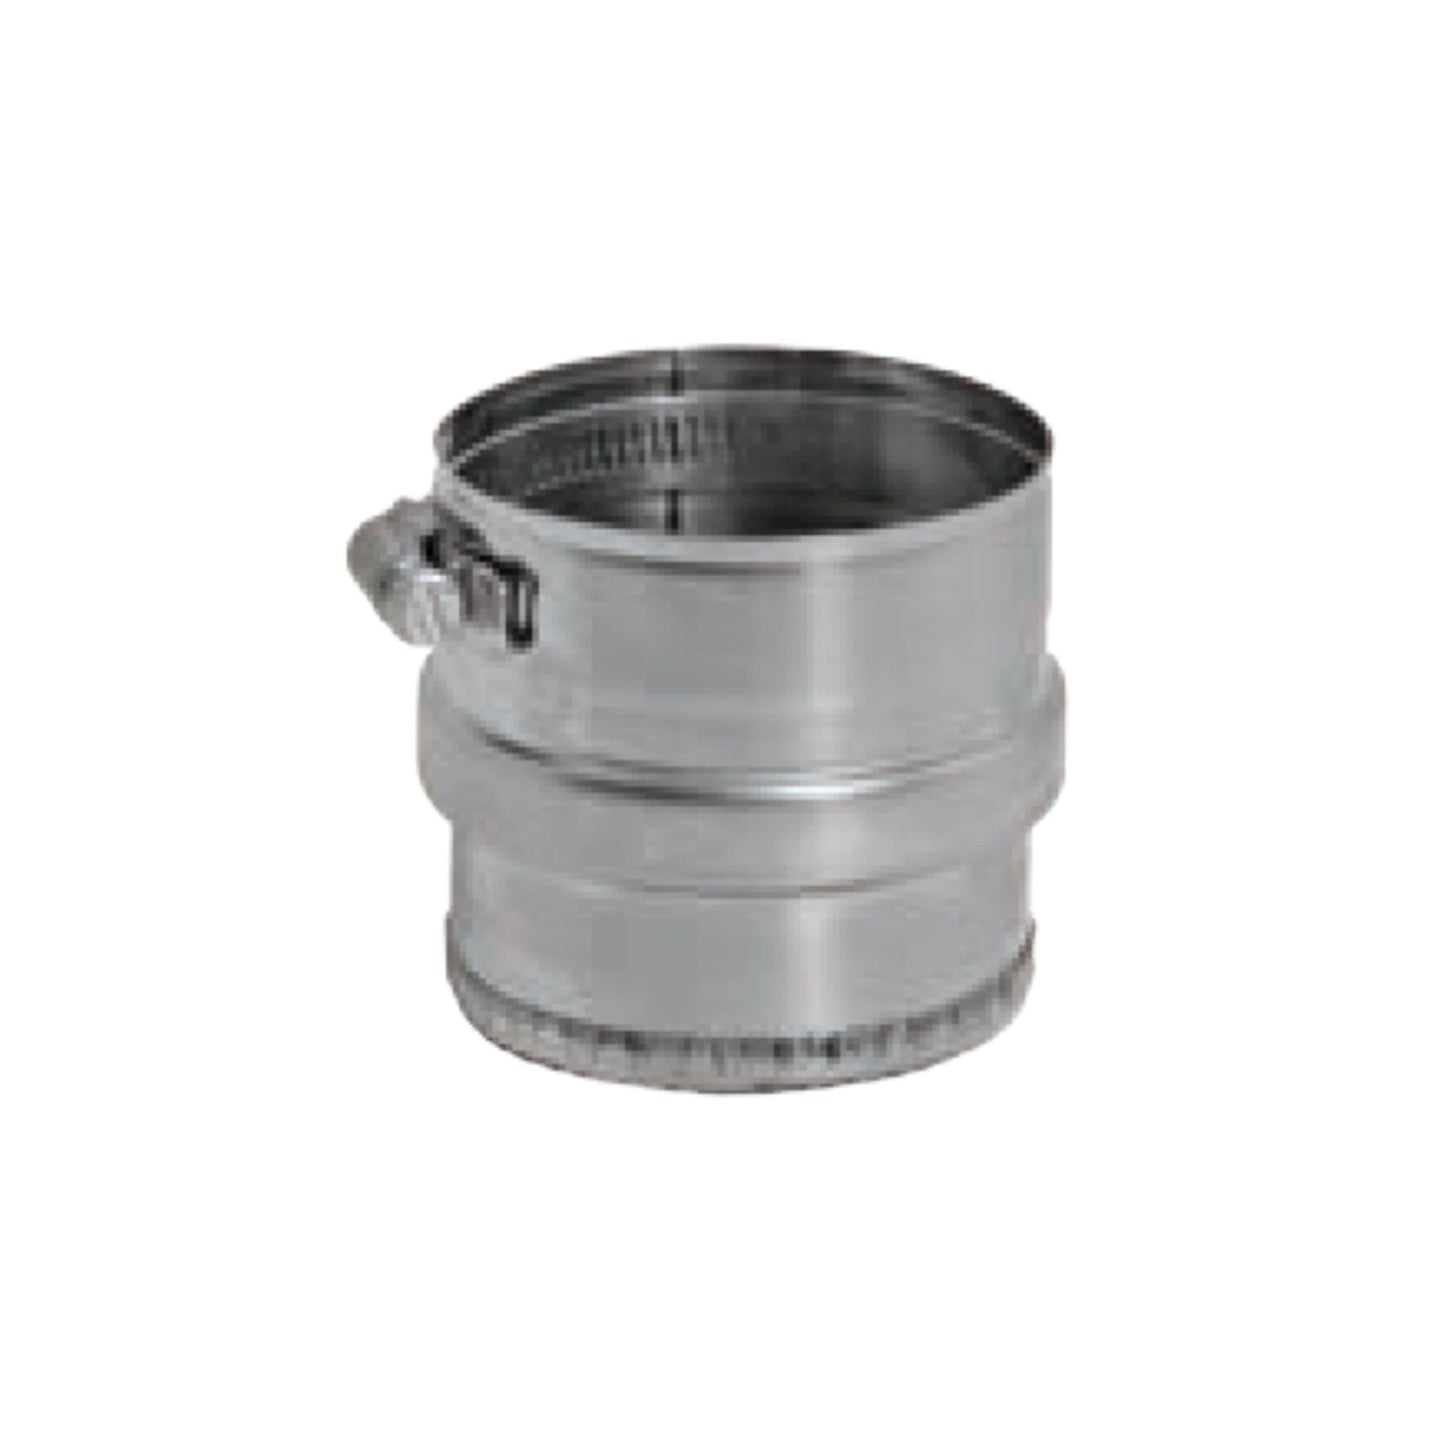 DuraVent FasNSeal 9" 316L Stainless Steel Tee Cap